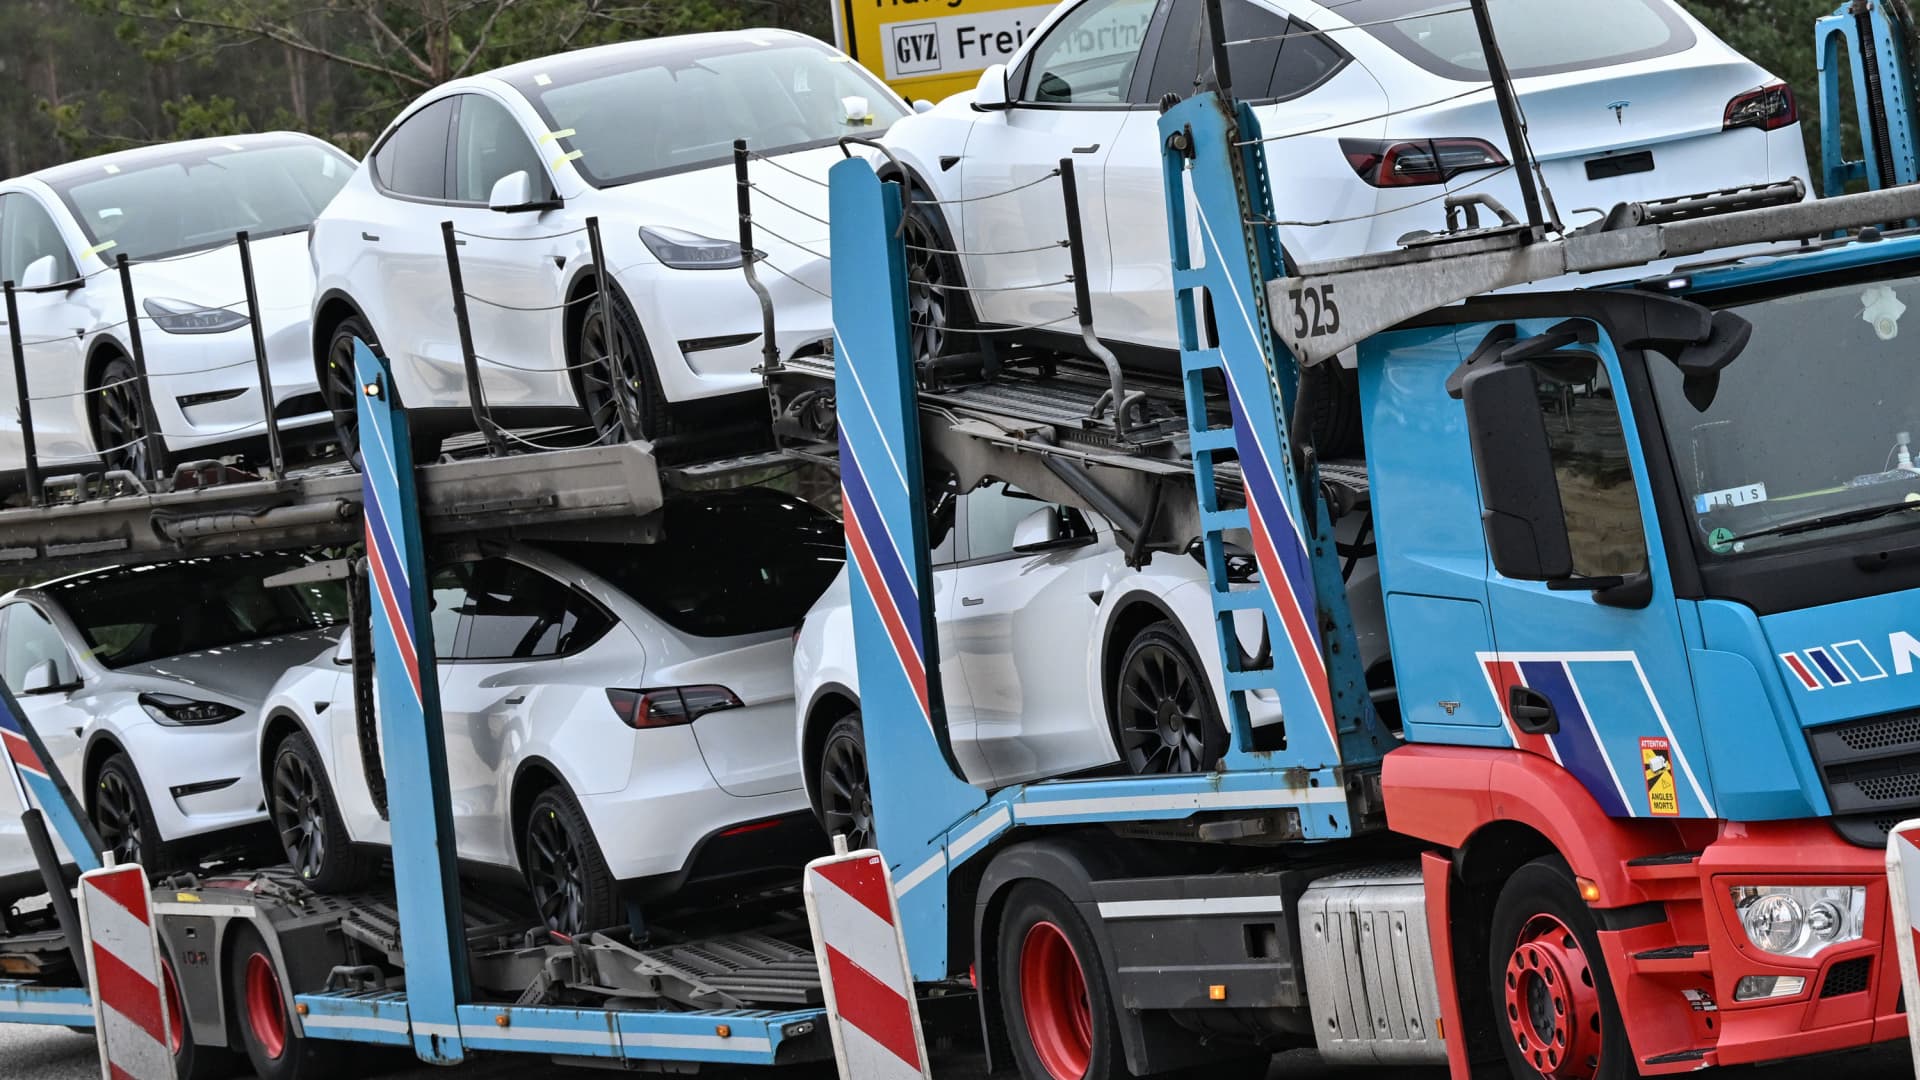 New Model Y electric vehicles are picked up by a truck from the Tesla Gigafactory Berlin-Brandenburg plant by US electric carmaker Tesla. Tesla says it currently employs more than 7000 people at its Grünheide plant.